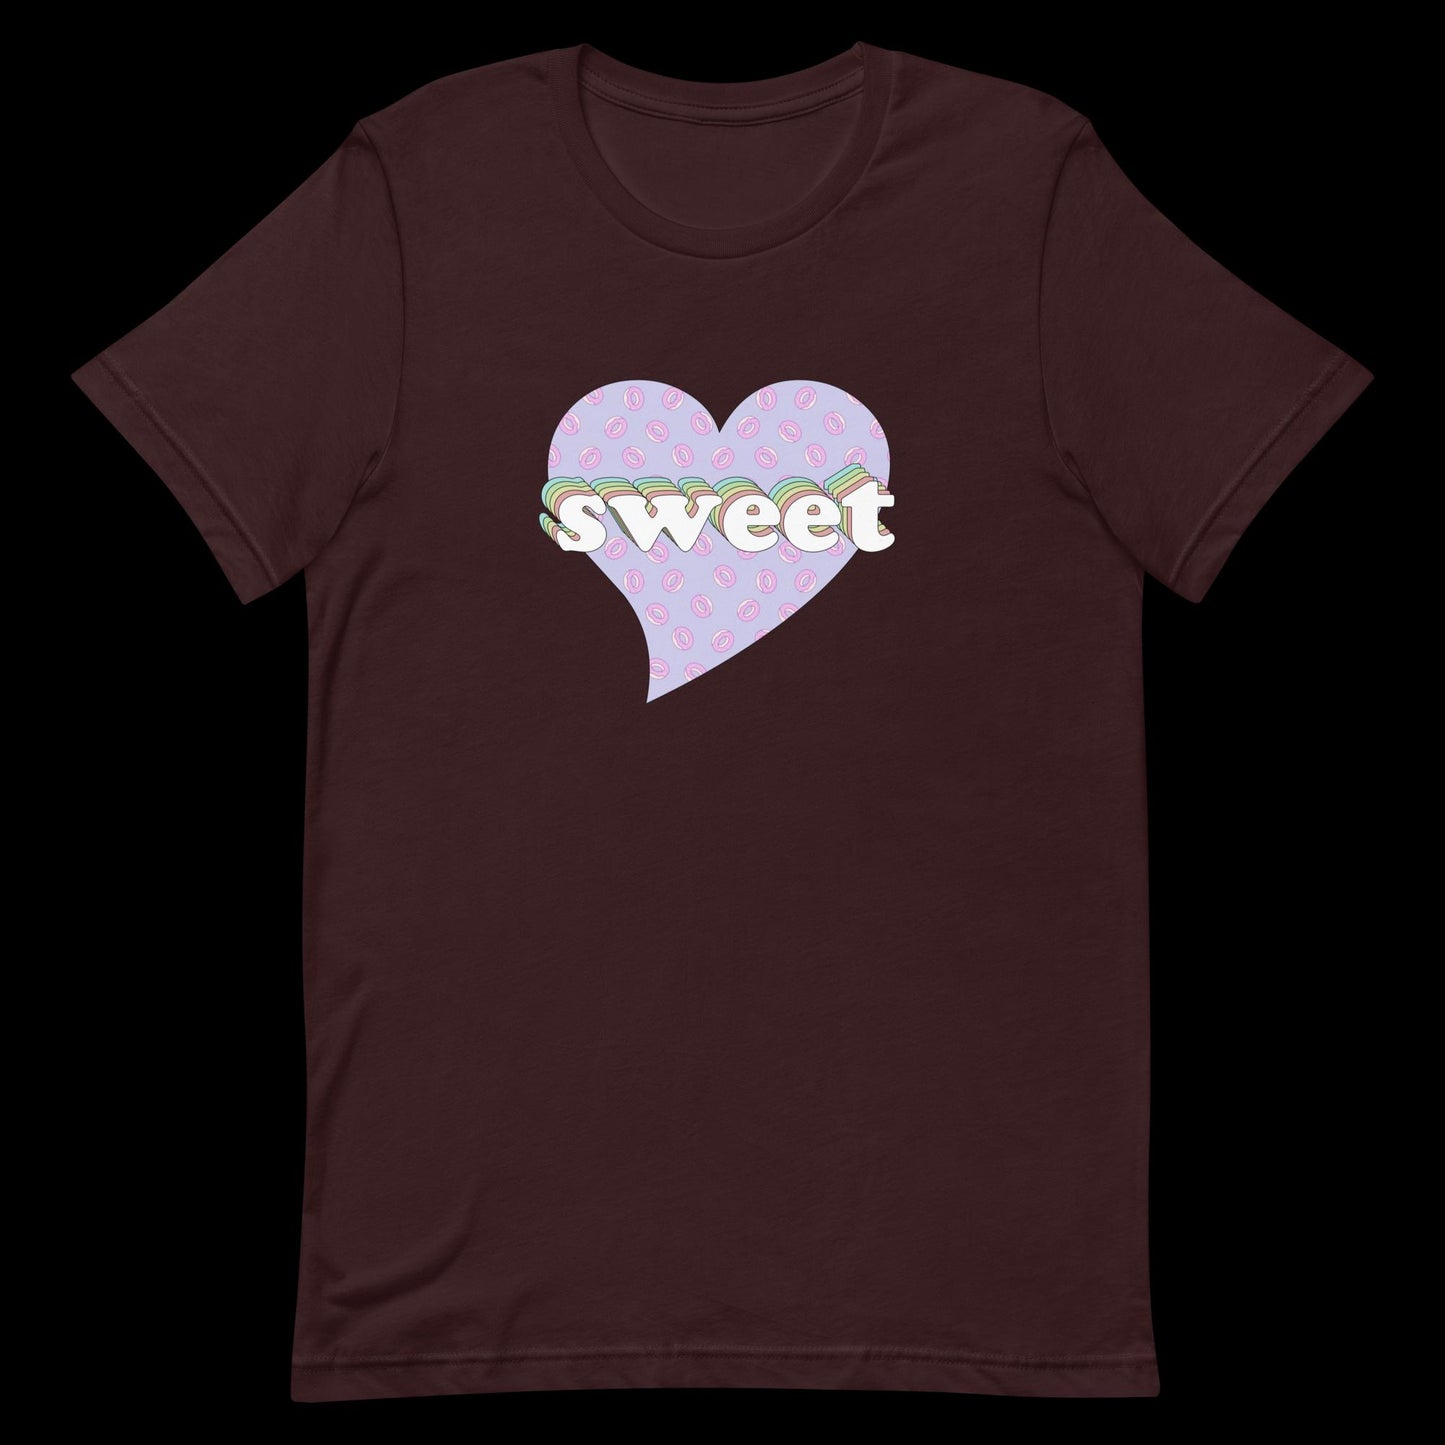 Sweet Heart with Donuts - Unisex T-Shirt